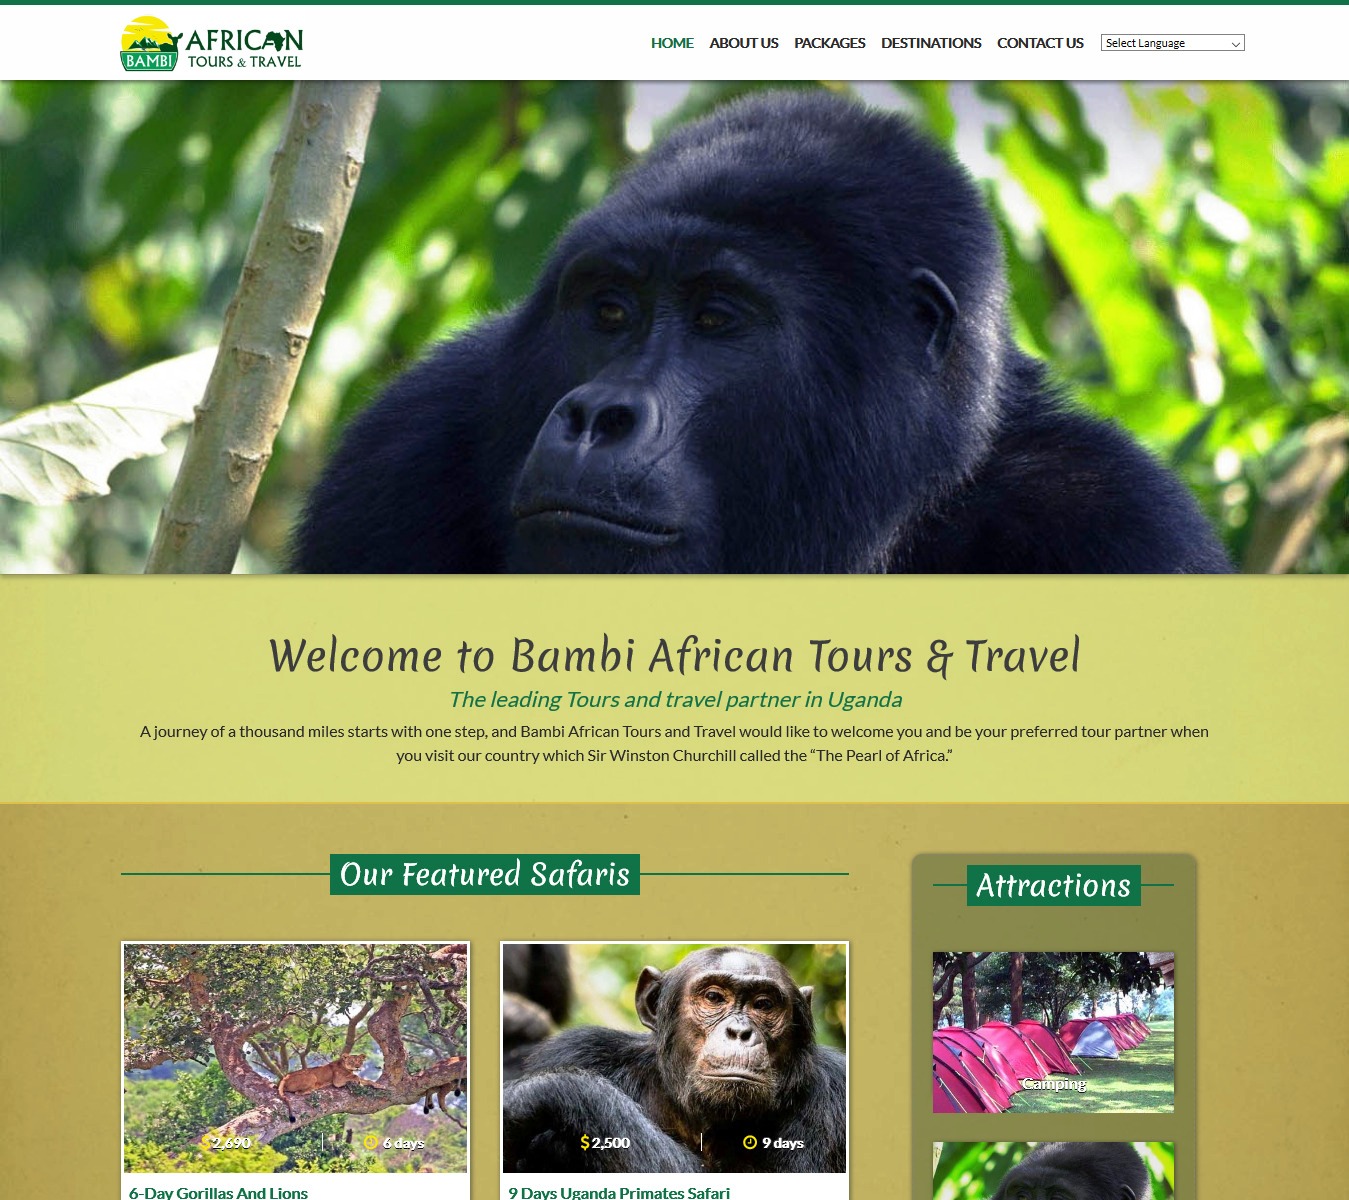 Bambi African Tours and Travel